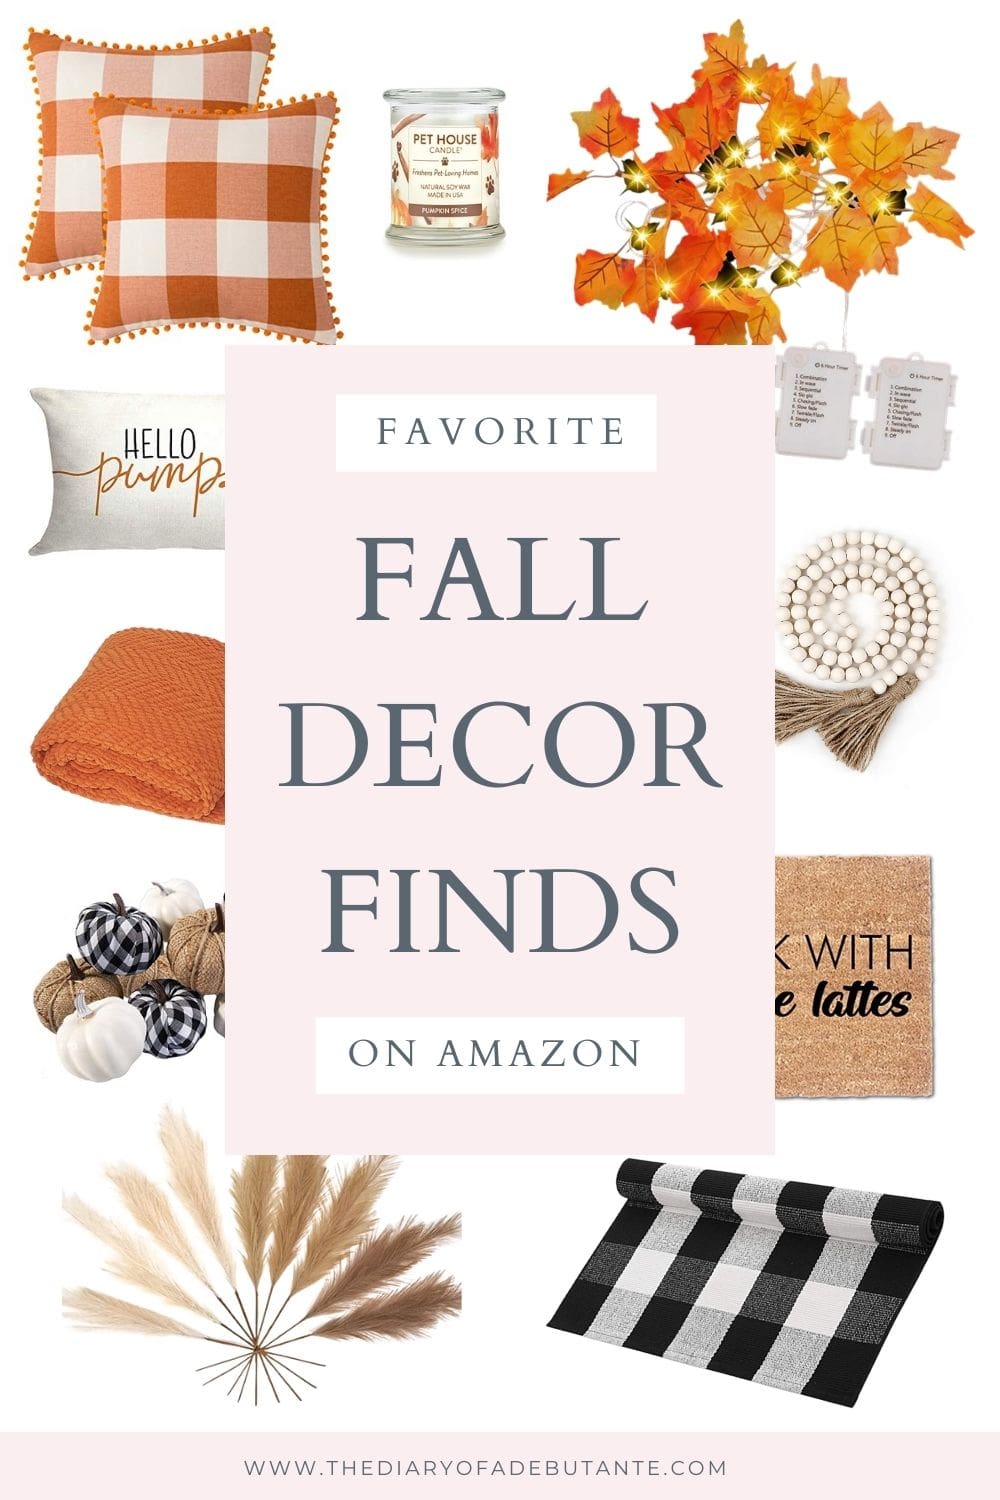 Blogger Stephanie Ziajka rounds up her favorite Amazon fall decor finds under $50 on Diary of a Debutante